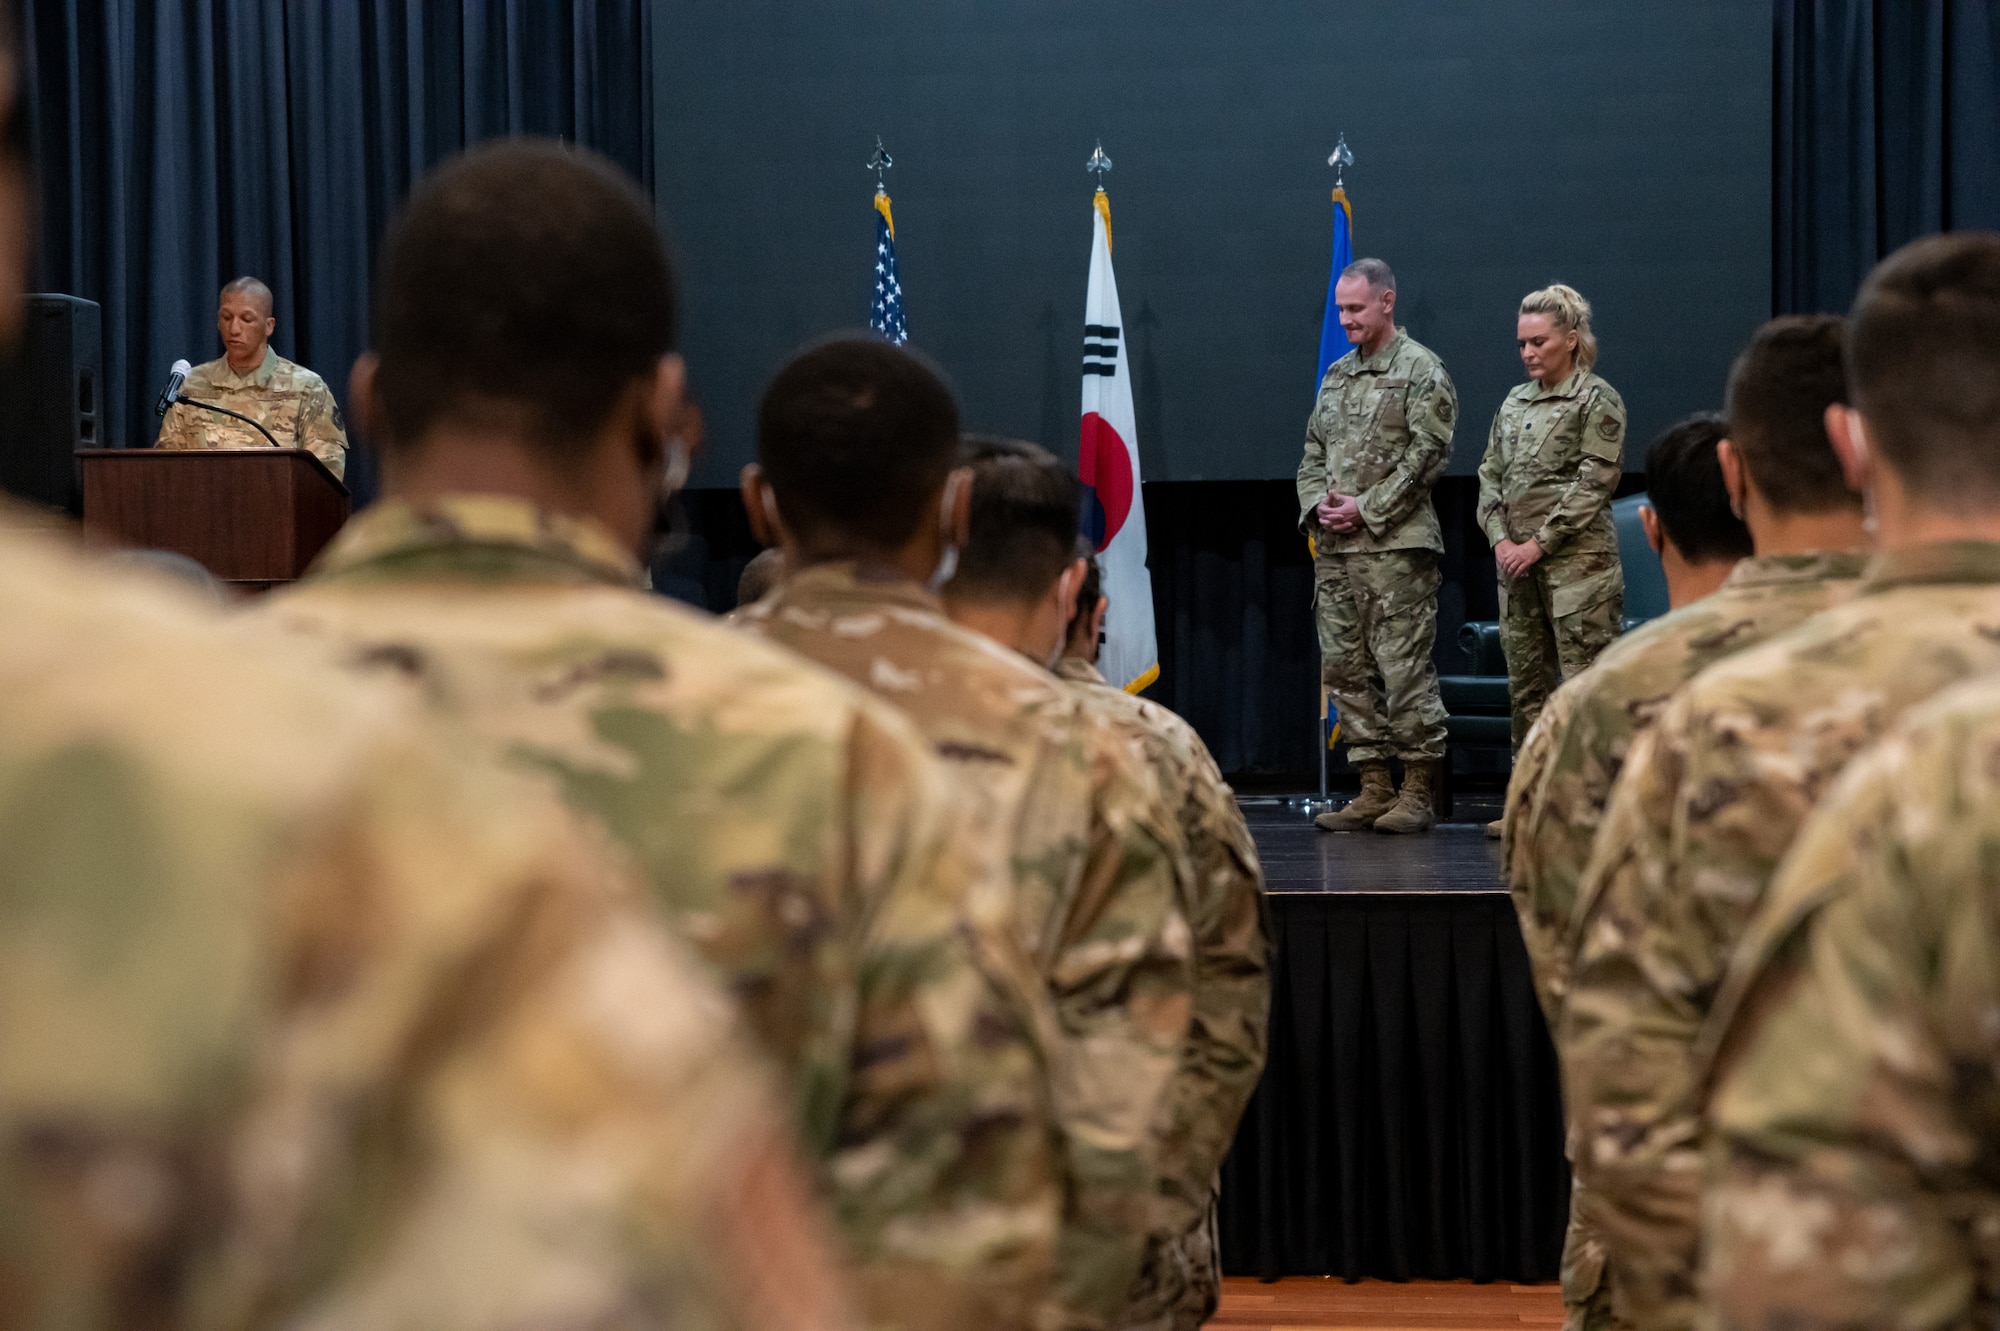 Chaplain Christopher Crutchfield, left, performs an invocation at the 51st Operational Medical Readiness Squadron assumption of command at Osan Air Base, Republic of Korea, June 29, 2021. The change of command ceremony is deeply rooted in military tradition that dates back to the reign of King Frederick of Prussia and has persisted into modern day. (U.S. Air Force photo by Tech. Sgt. Nicholas Alder)